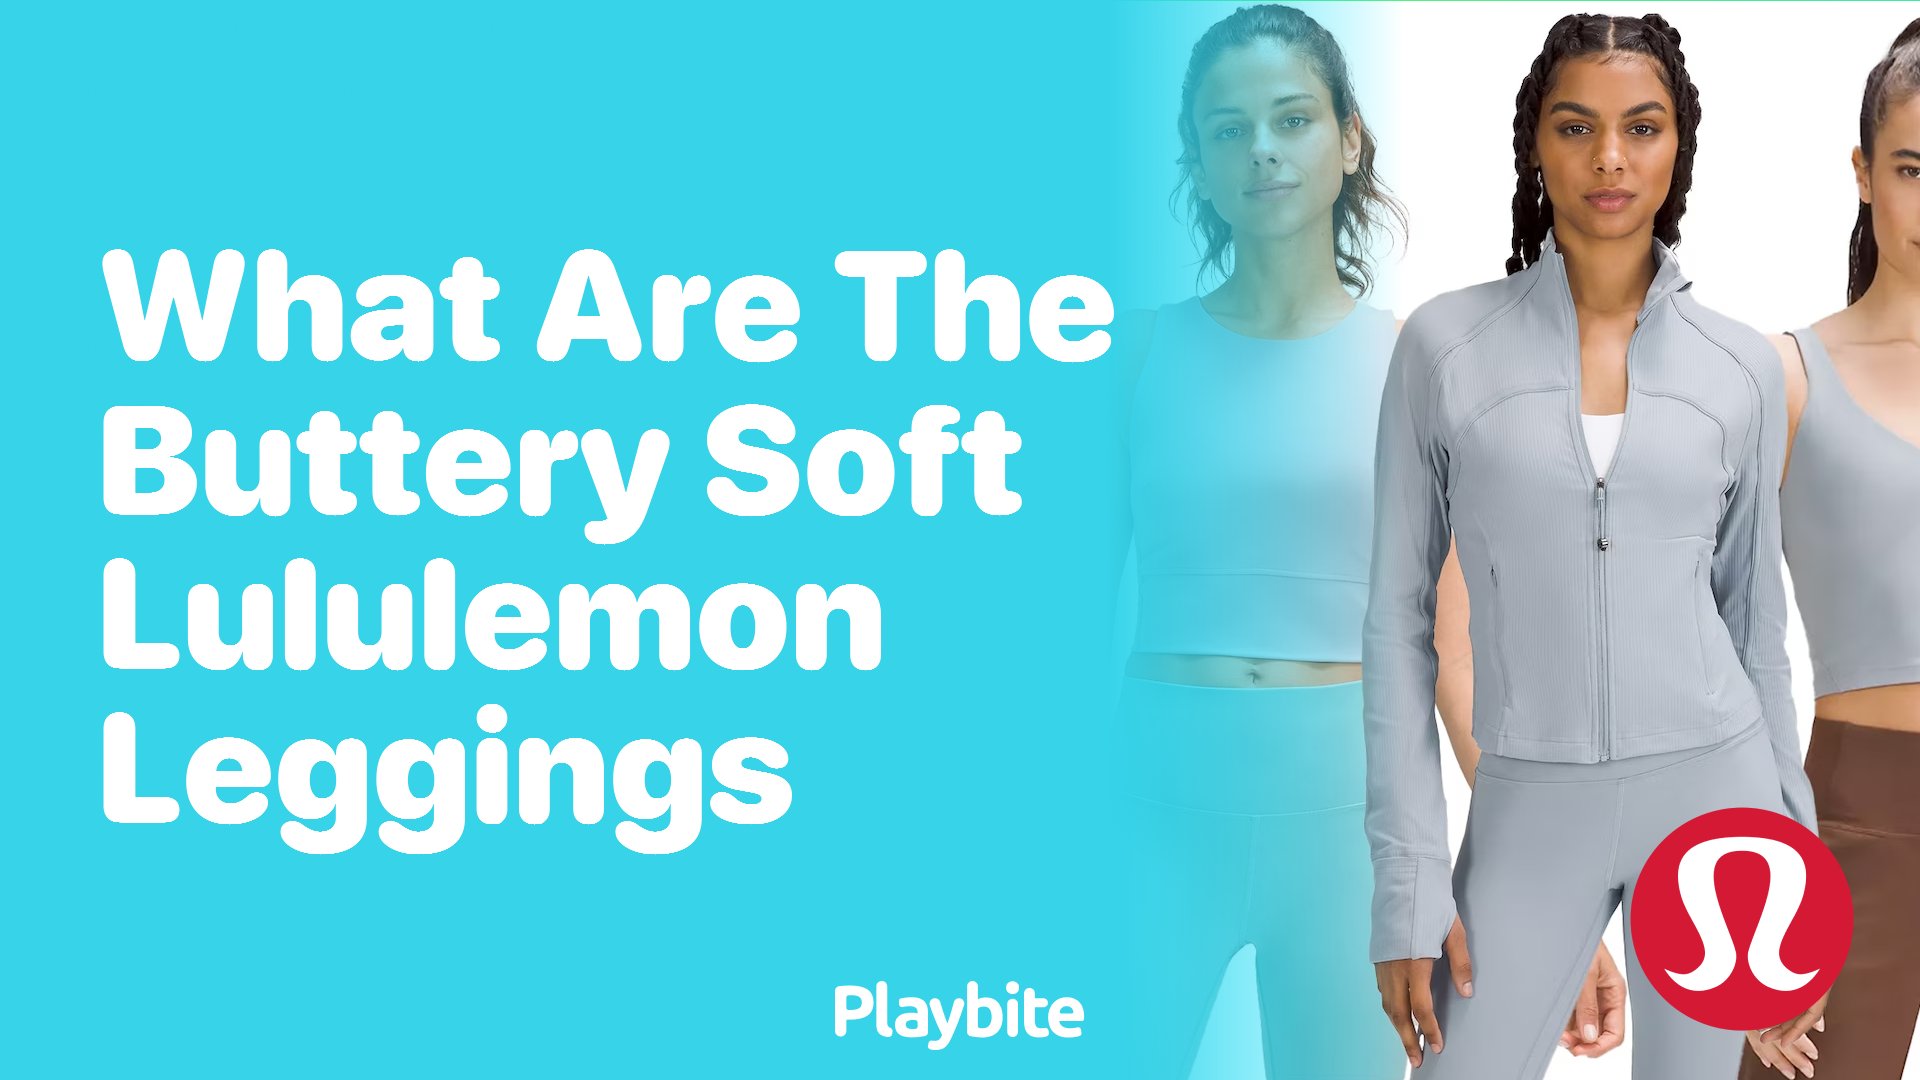 What Are the Buttery Soft Lululemon Leggings? - Playbite